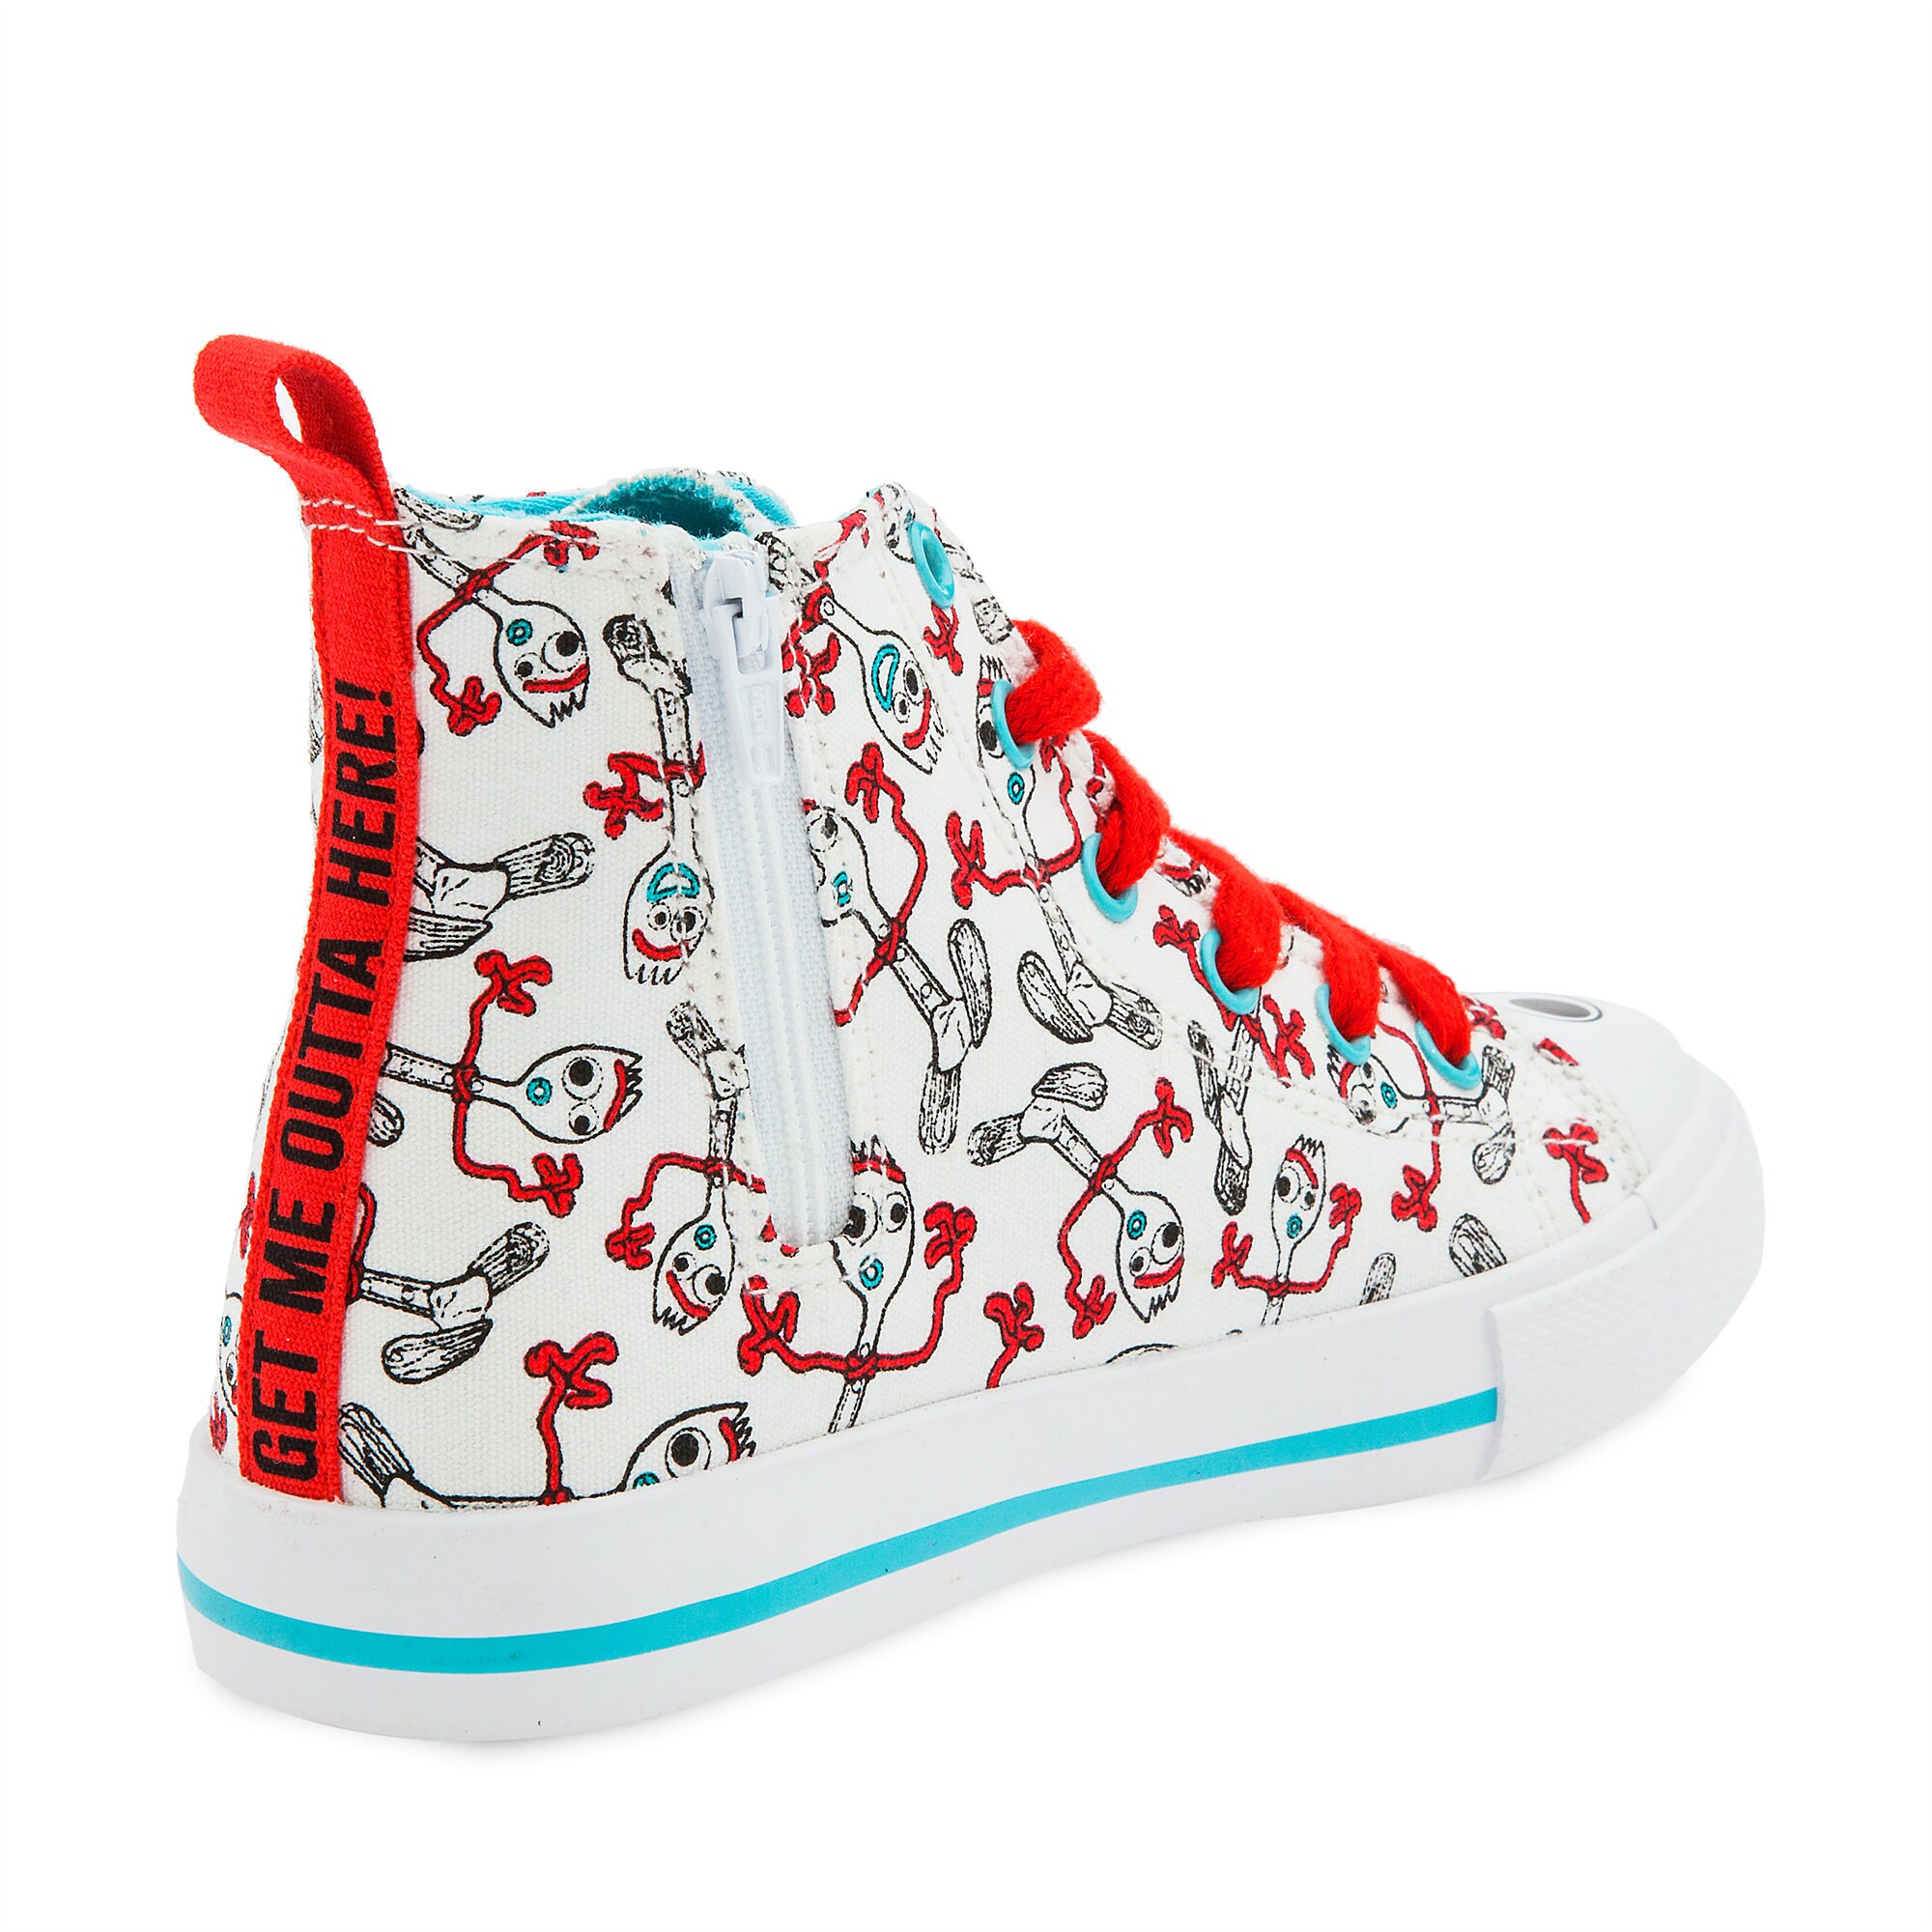 Forky Sneakers for Kids - Toy Story 4